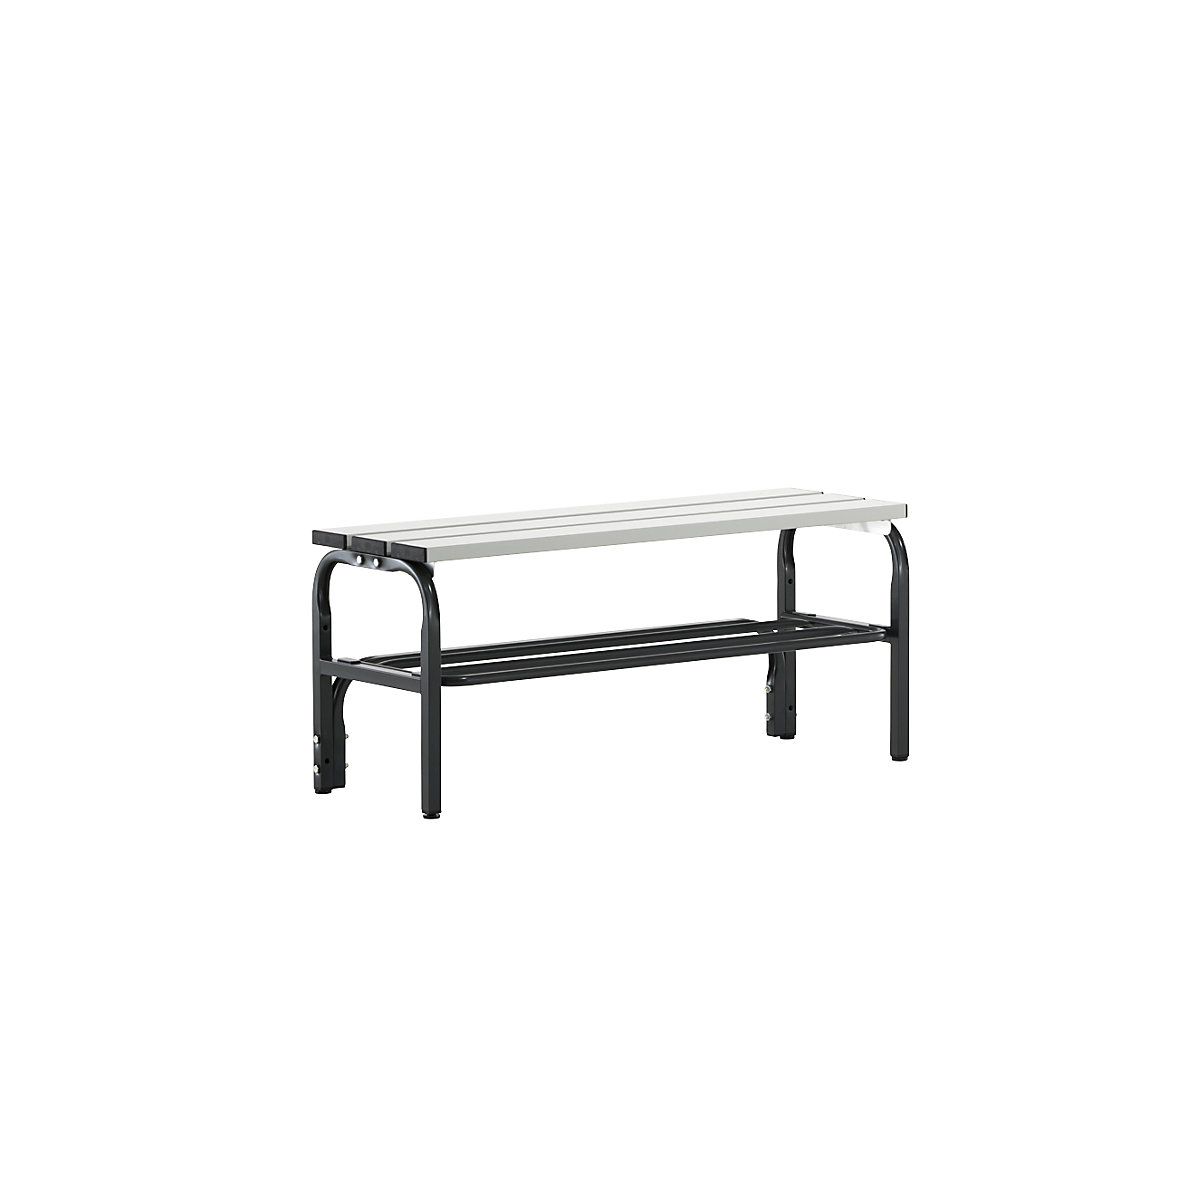 Sypro – Changing room bench made of stainless steel, HxD 450 x 350 mm, length 1015 mm, charcoal, shoe rack